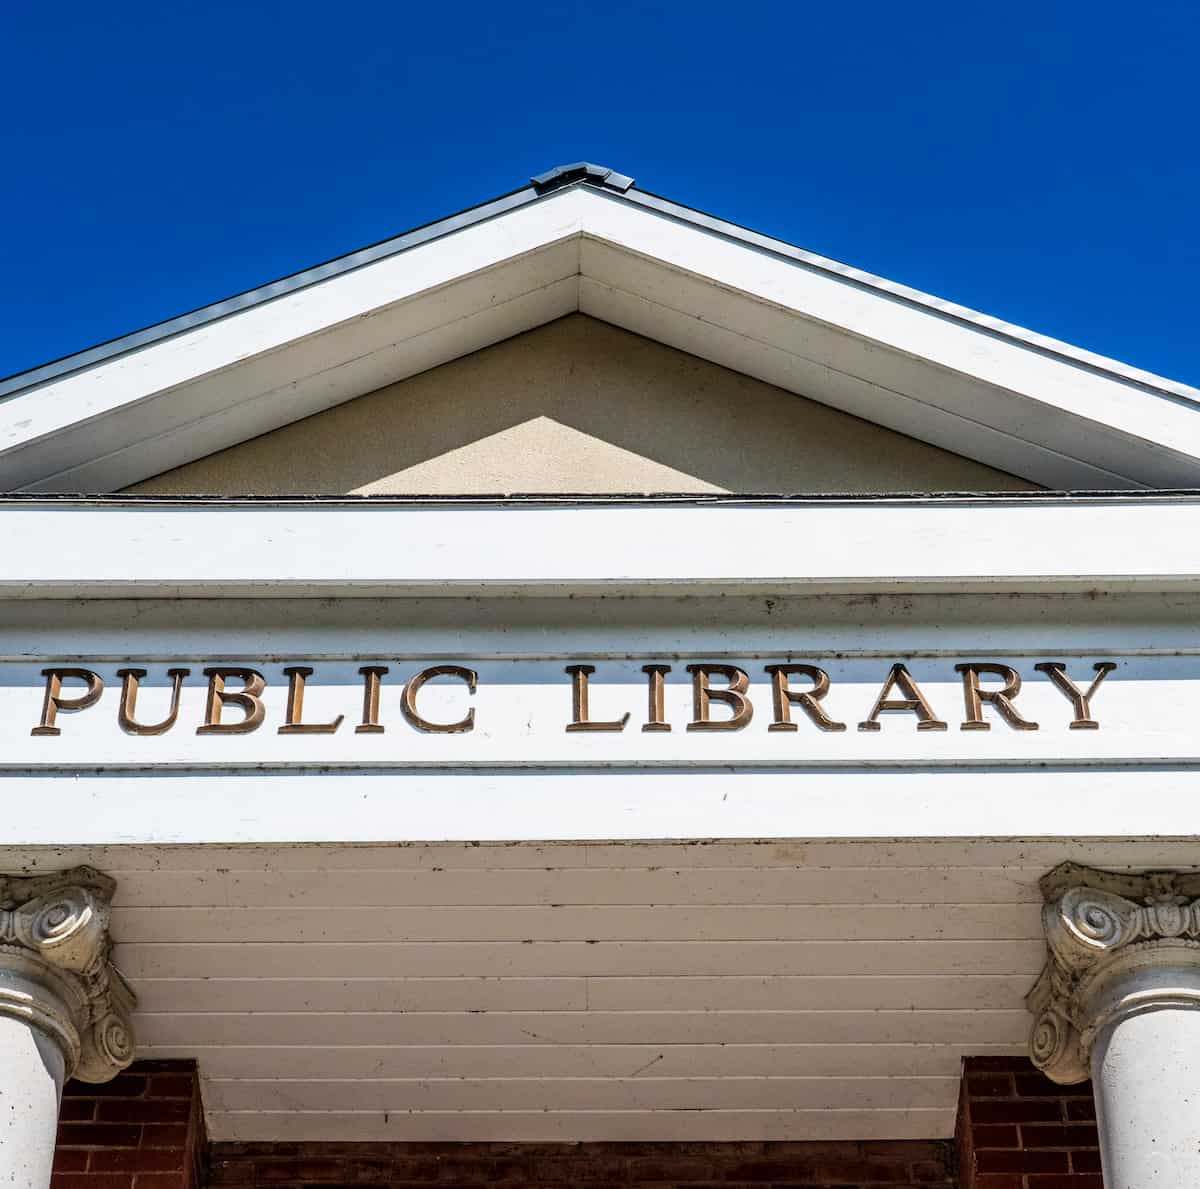 photo of public library sign and roof against blue sky representing free HR resources